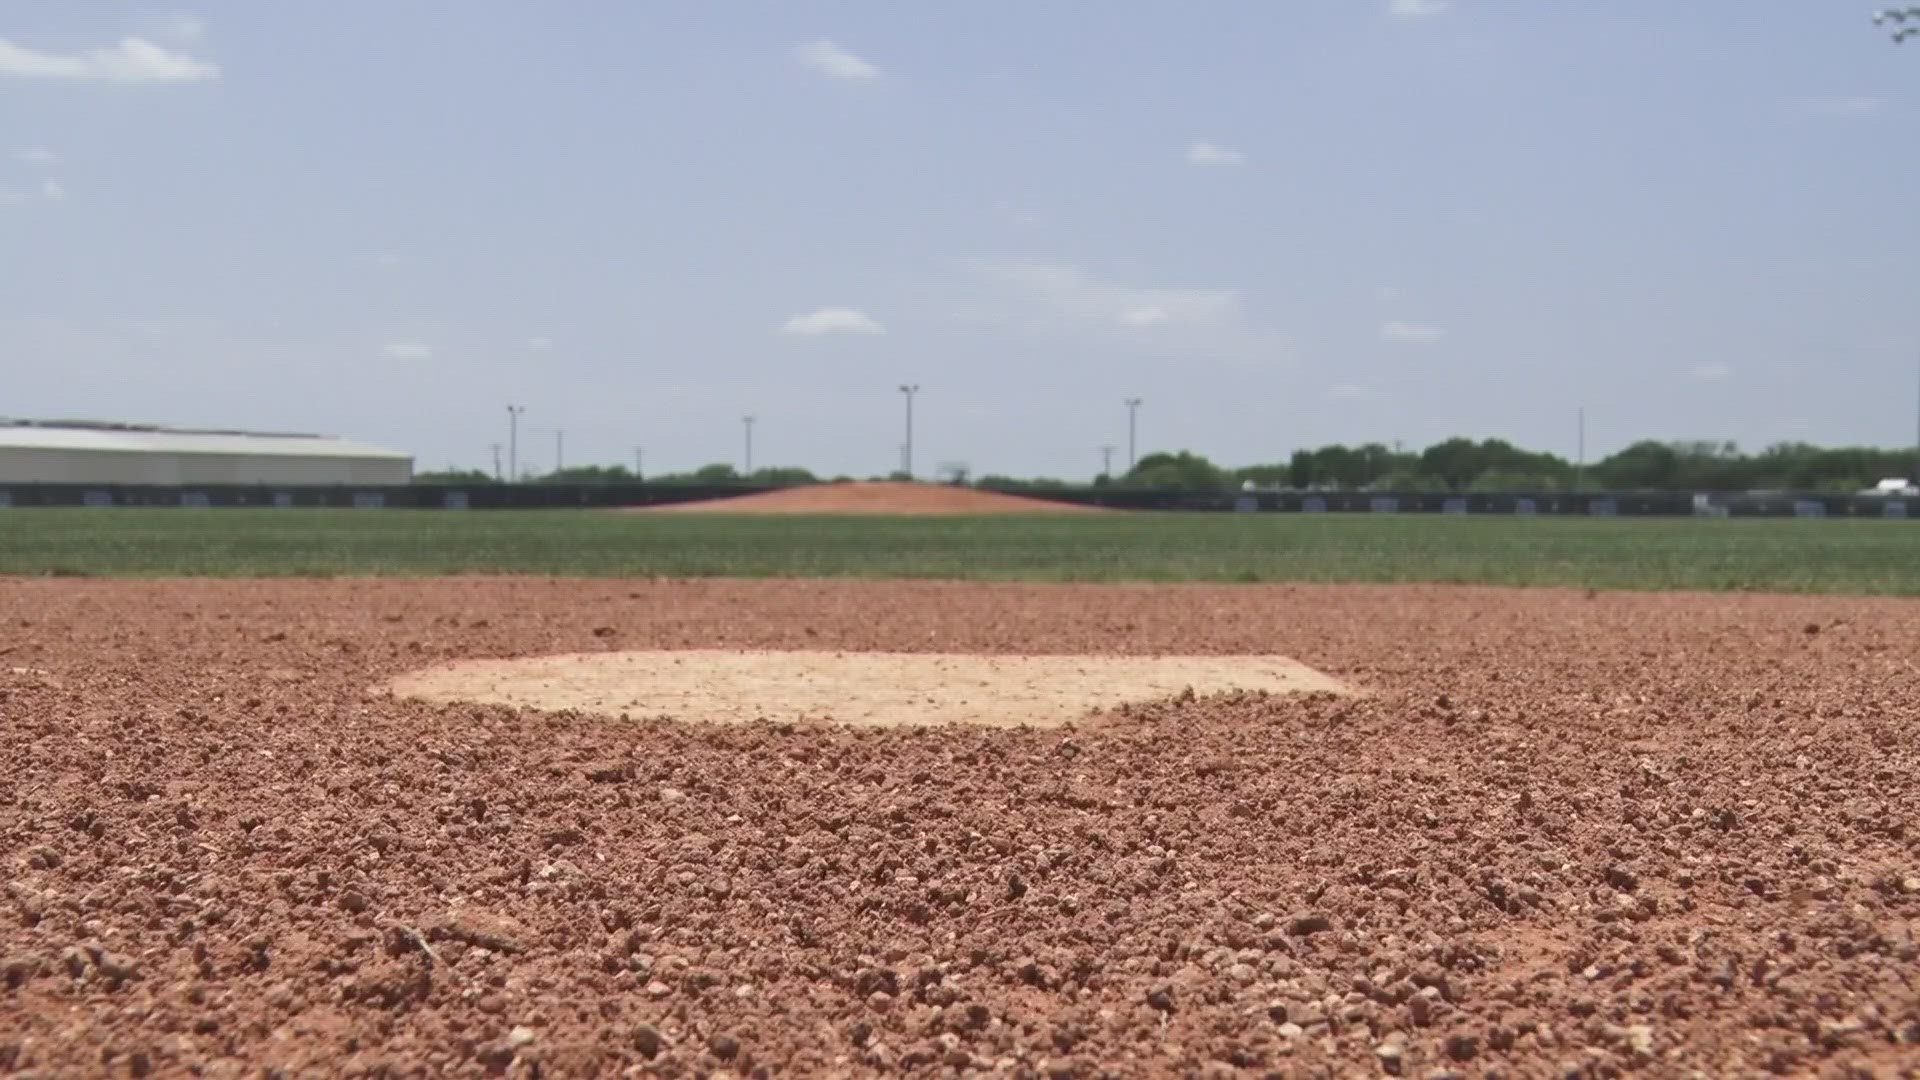 On Thursday, the China Spring Cougars played a best-of-three series against Taylor to fight for a spot in the state tournament. But, the 90 degree heat hit hard.